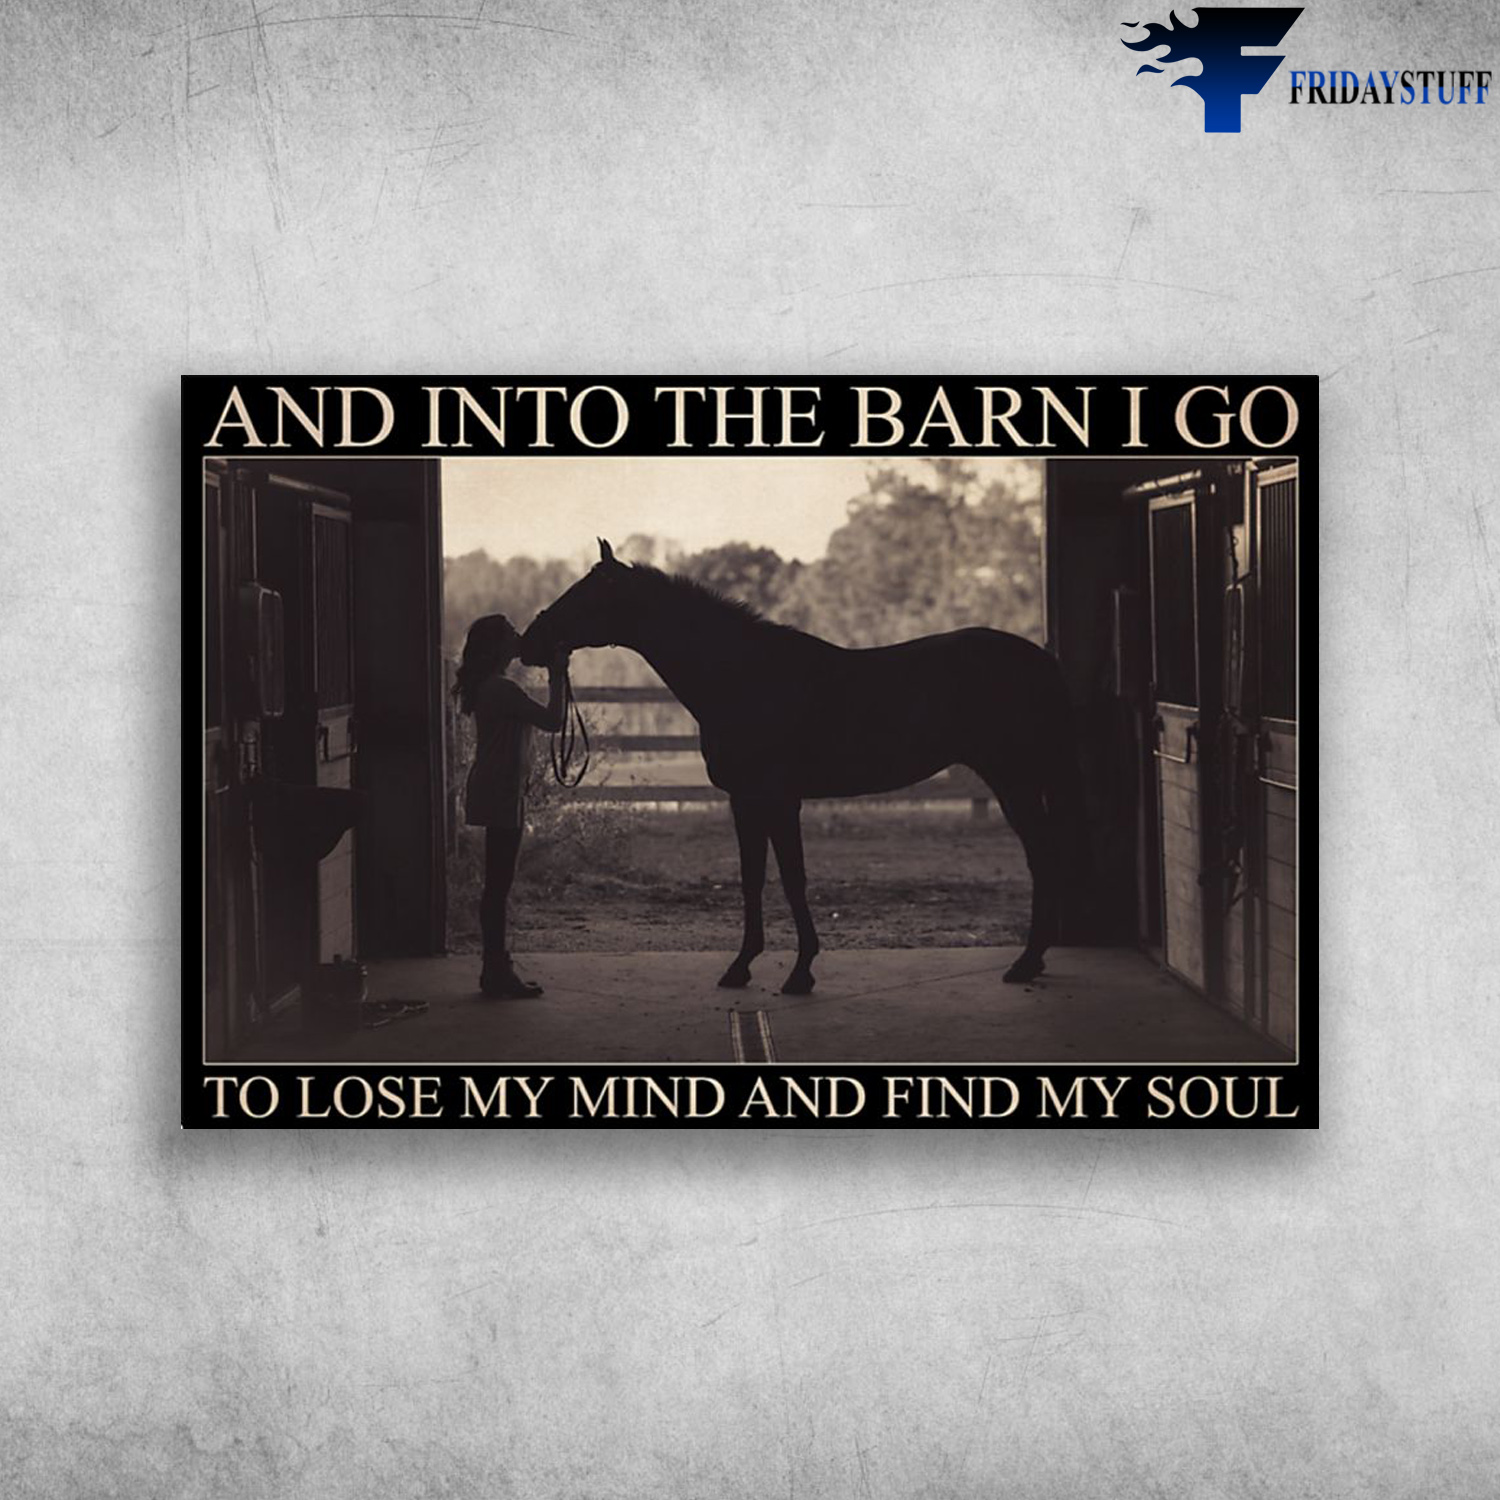 ANd Into The Barn I Go, To Lose My Mind And Find My Soul